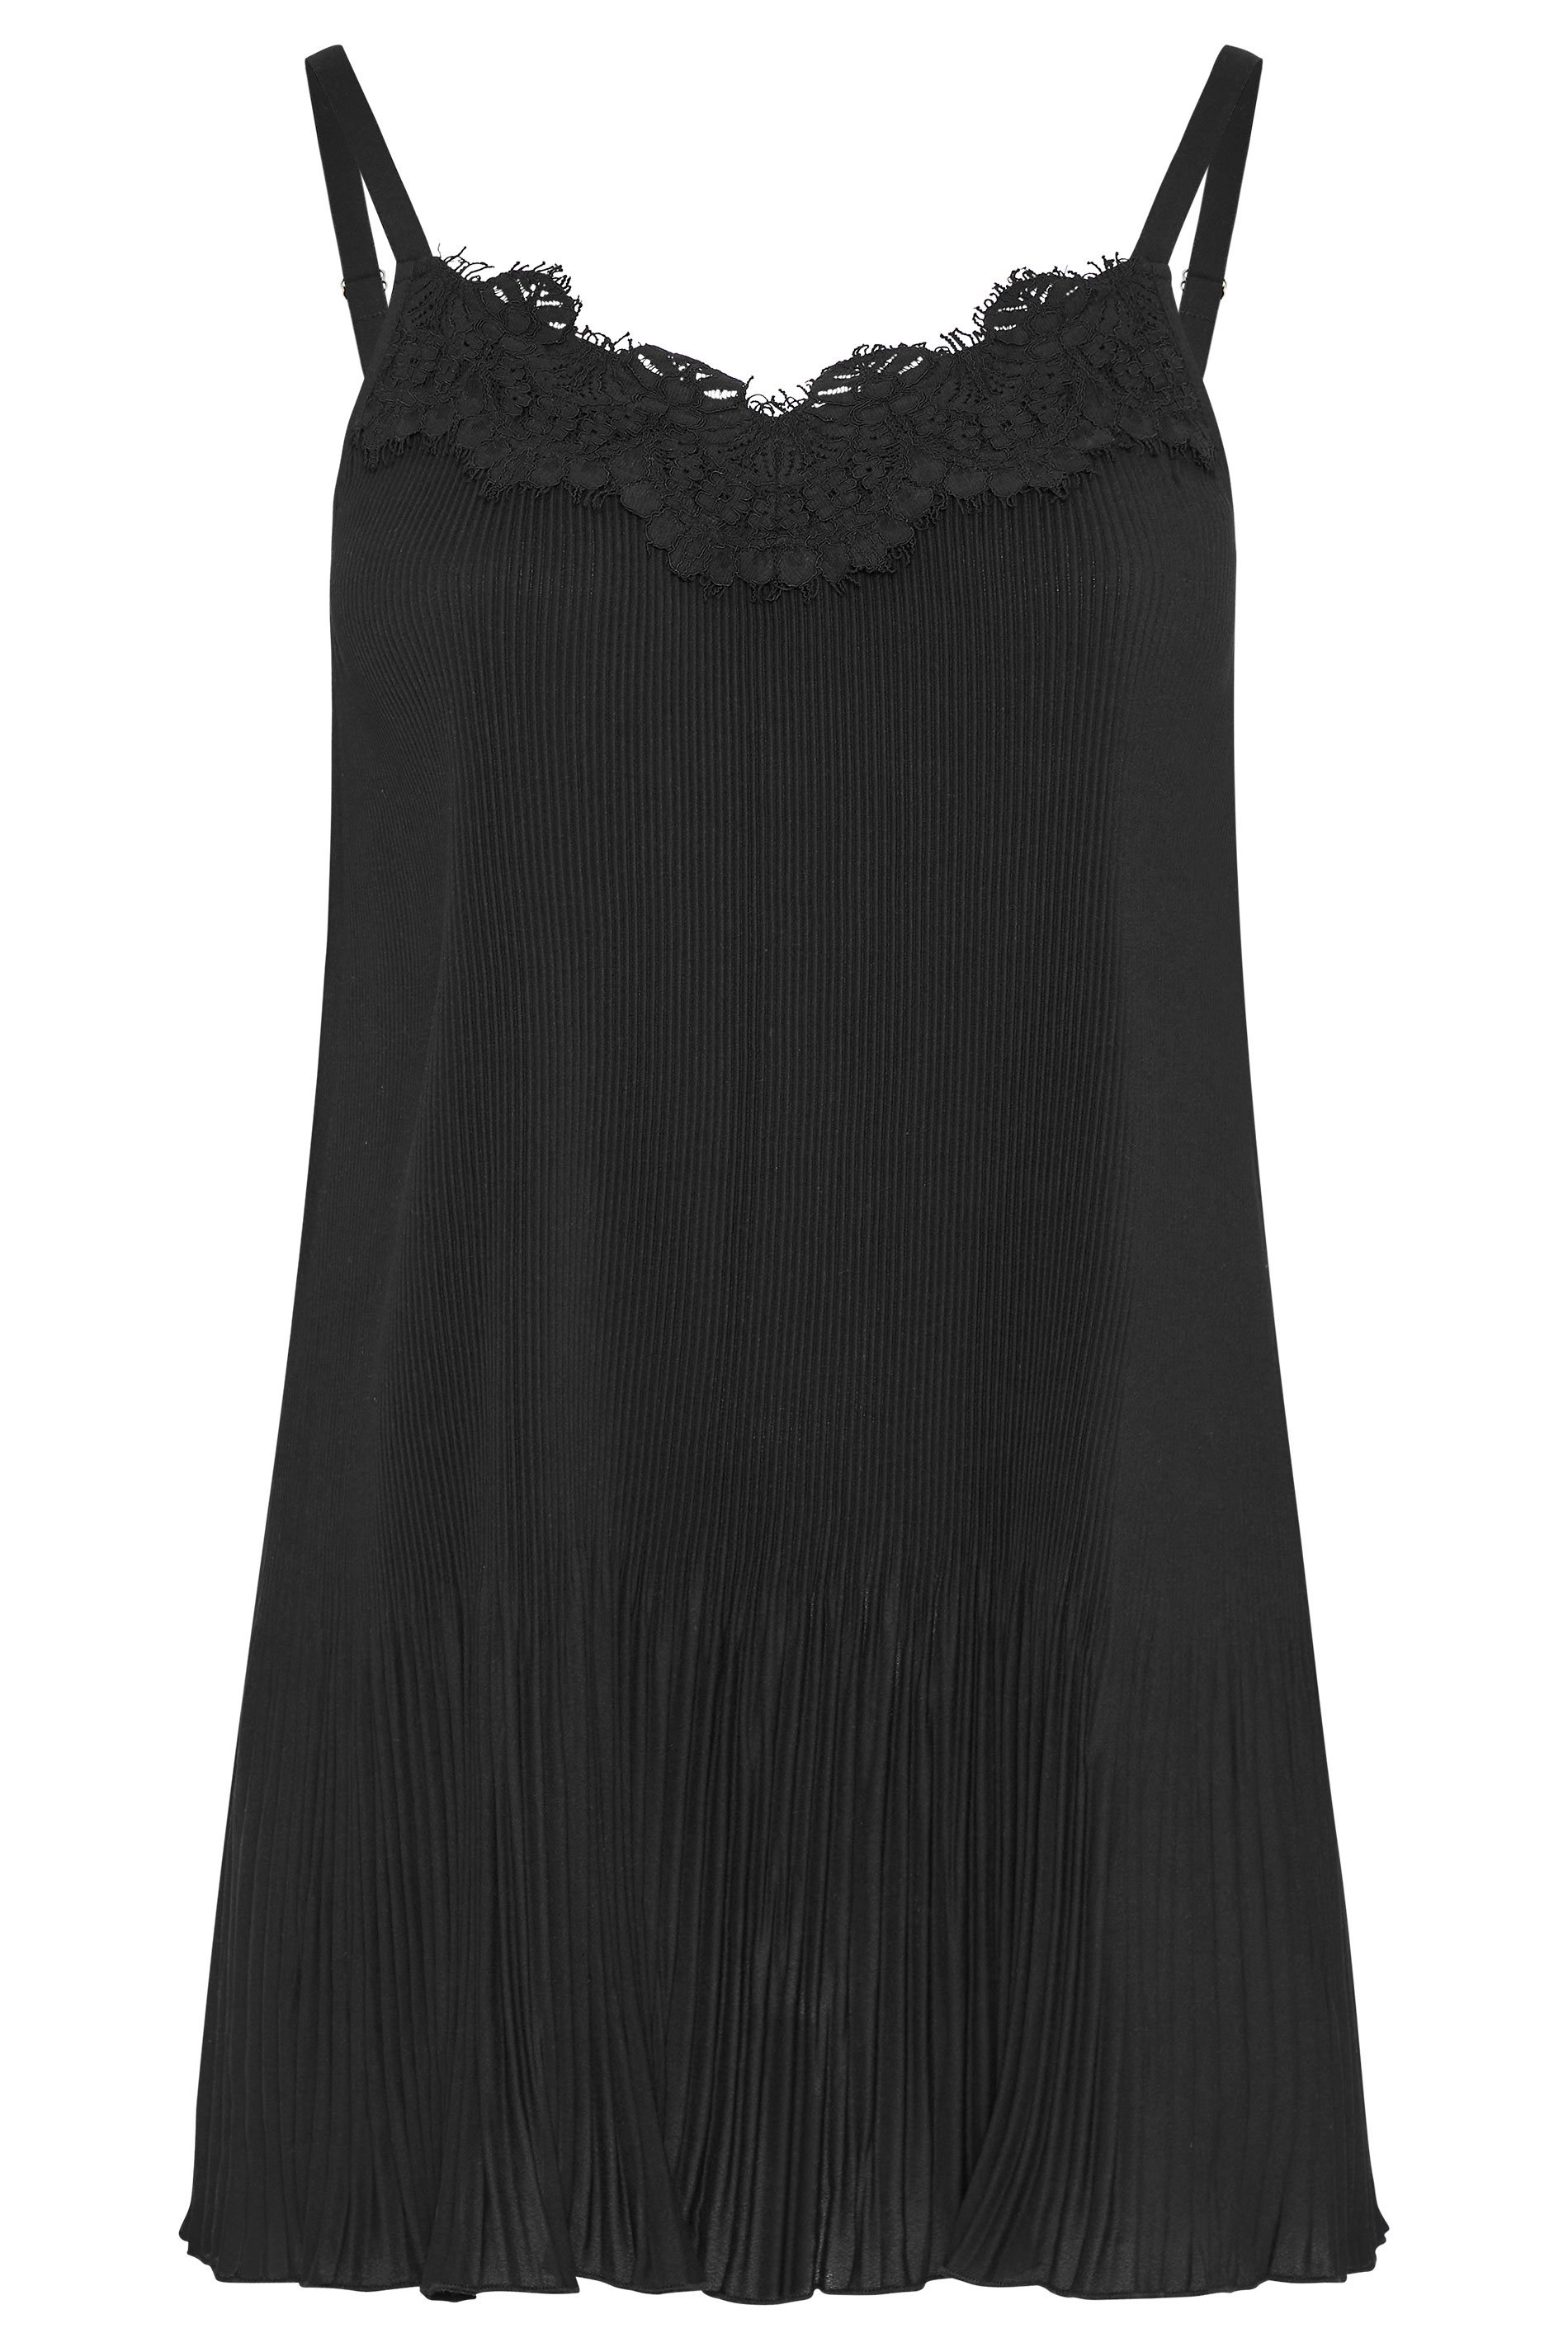 YOURS LONDON Black Pleat Lace Cami | Yours Clothing